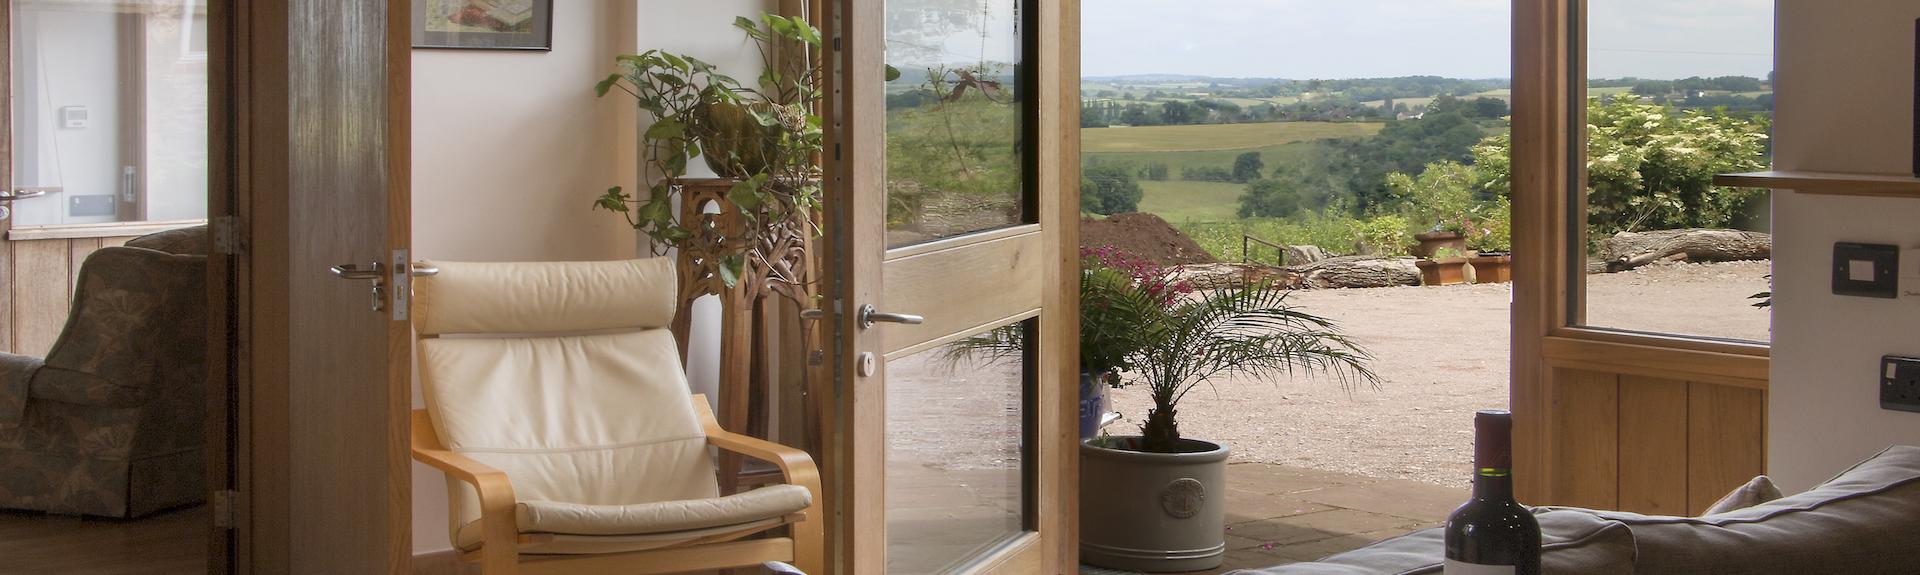 Glorious rural views from Valley View Cottage in Herefordshire